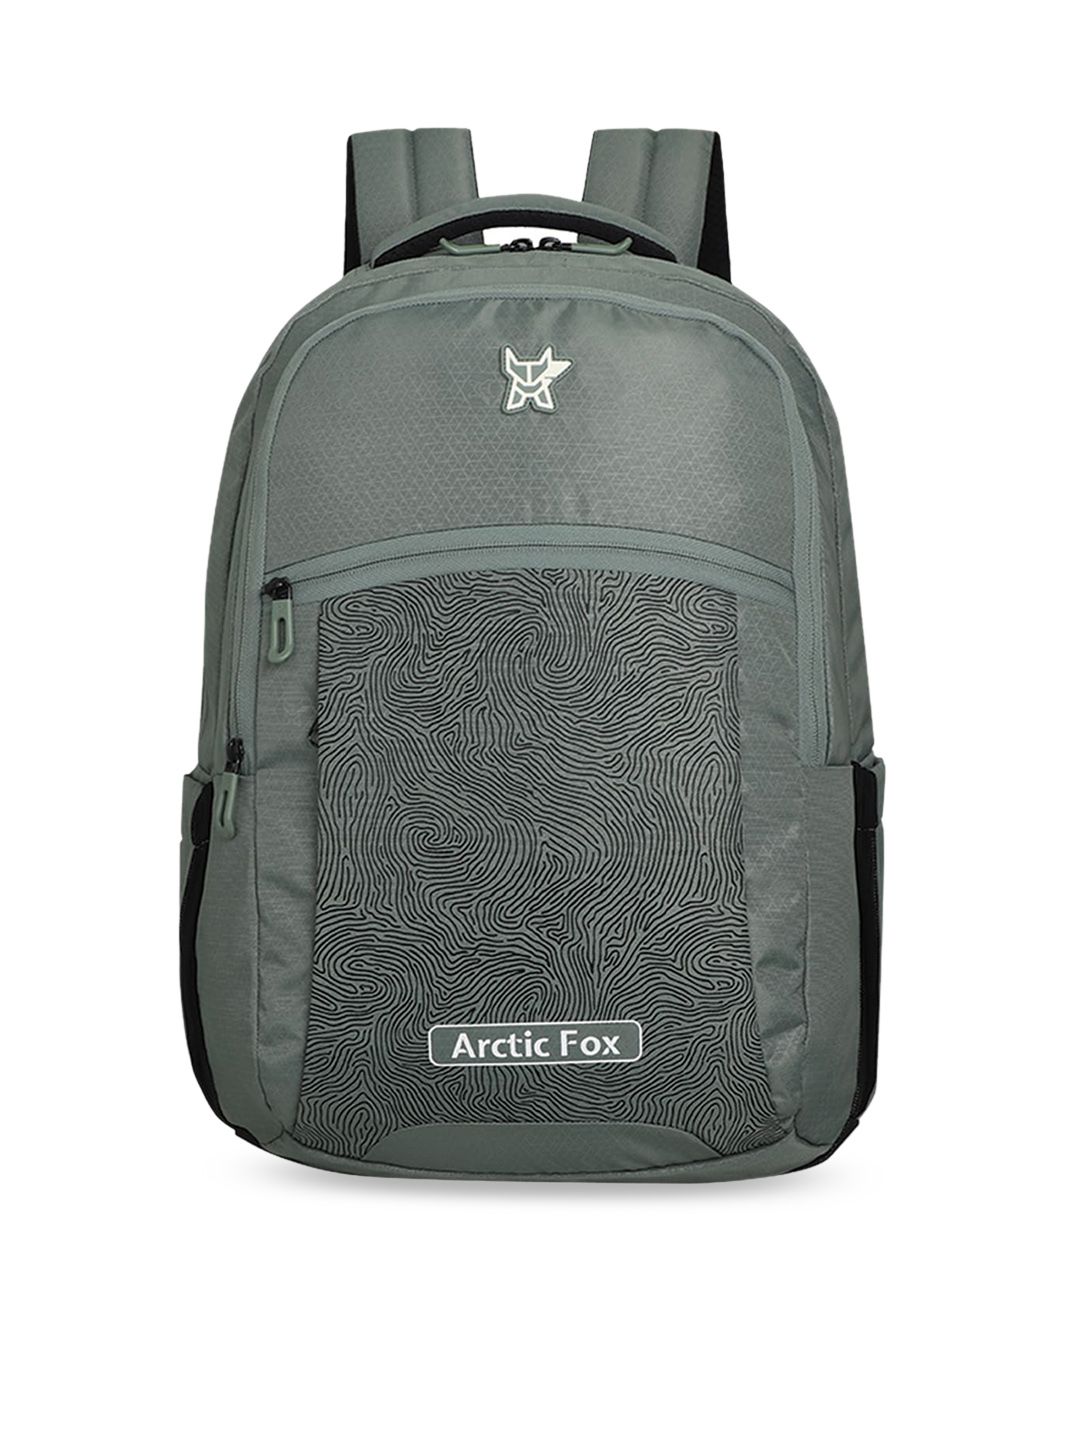 Arctic Fox Unisex Green & Grey Backpack Price in India